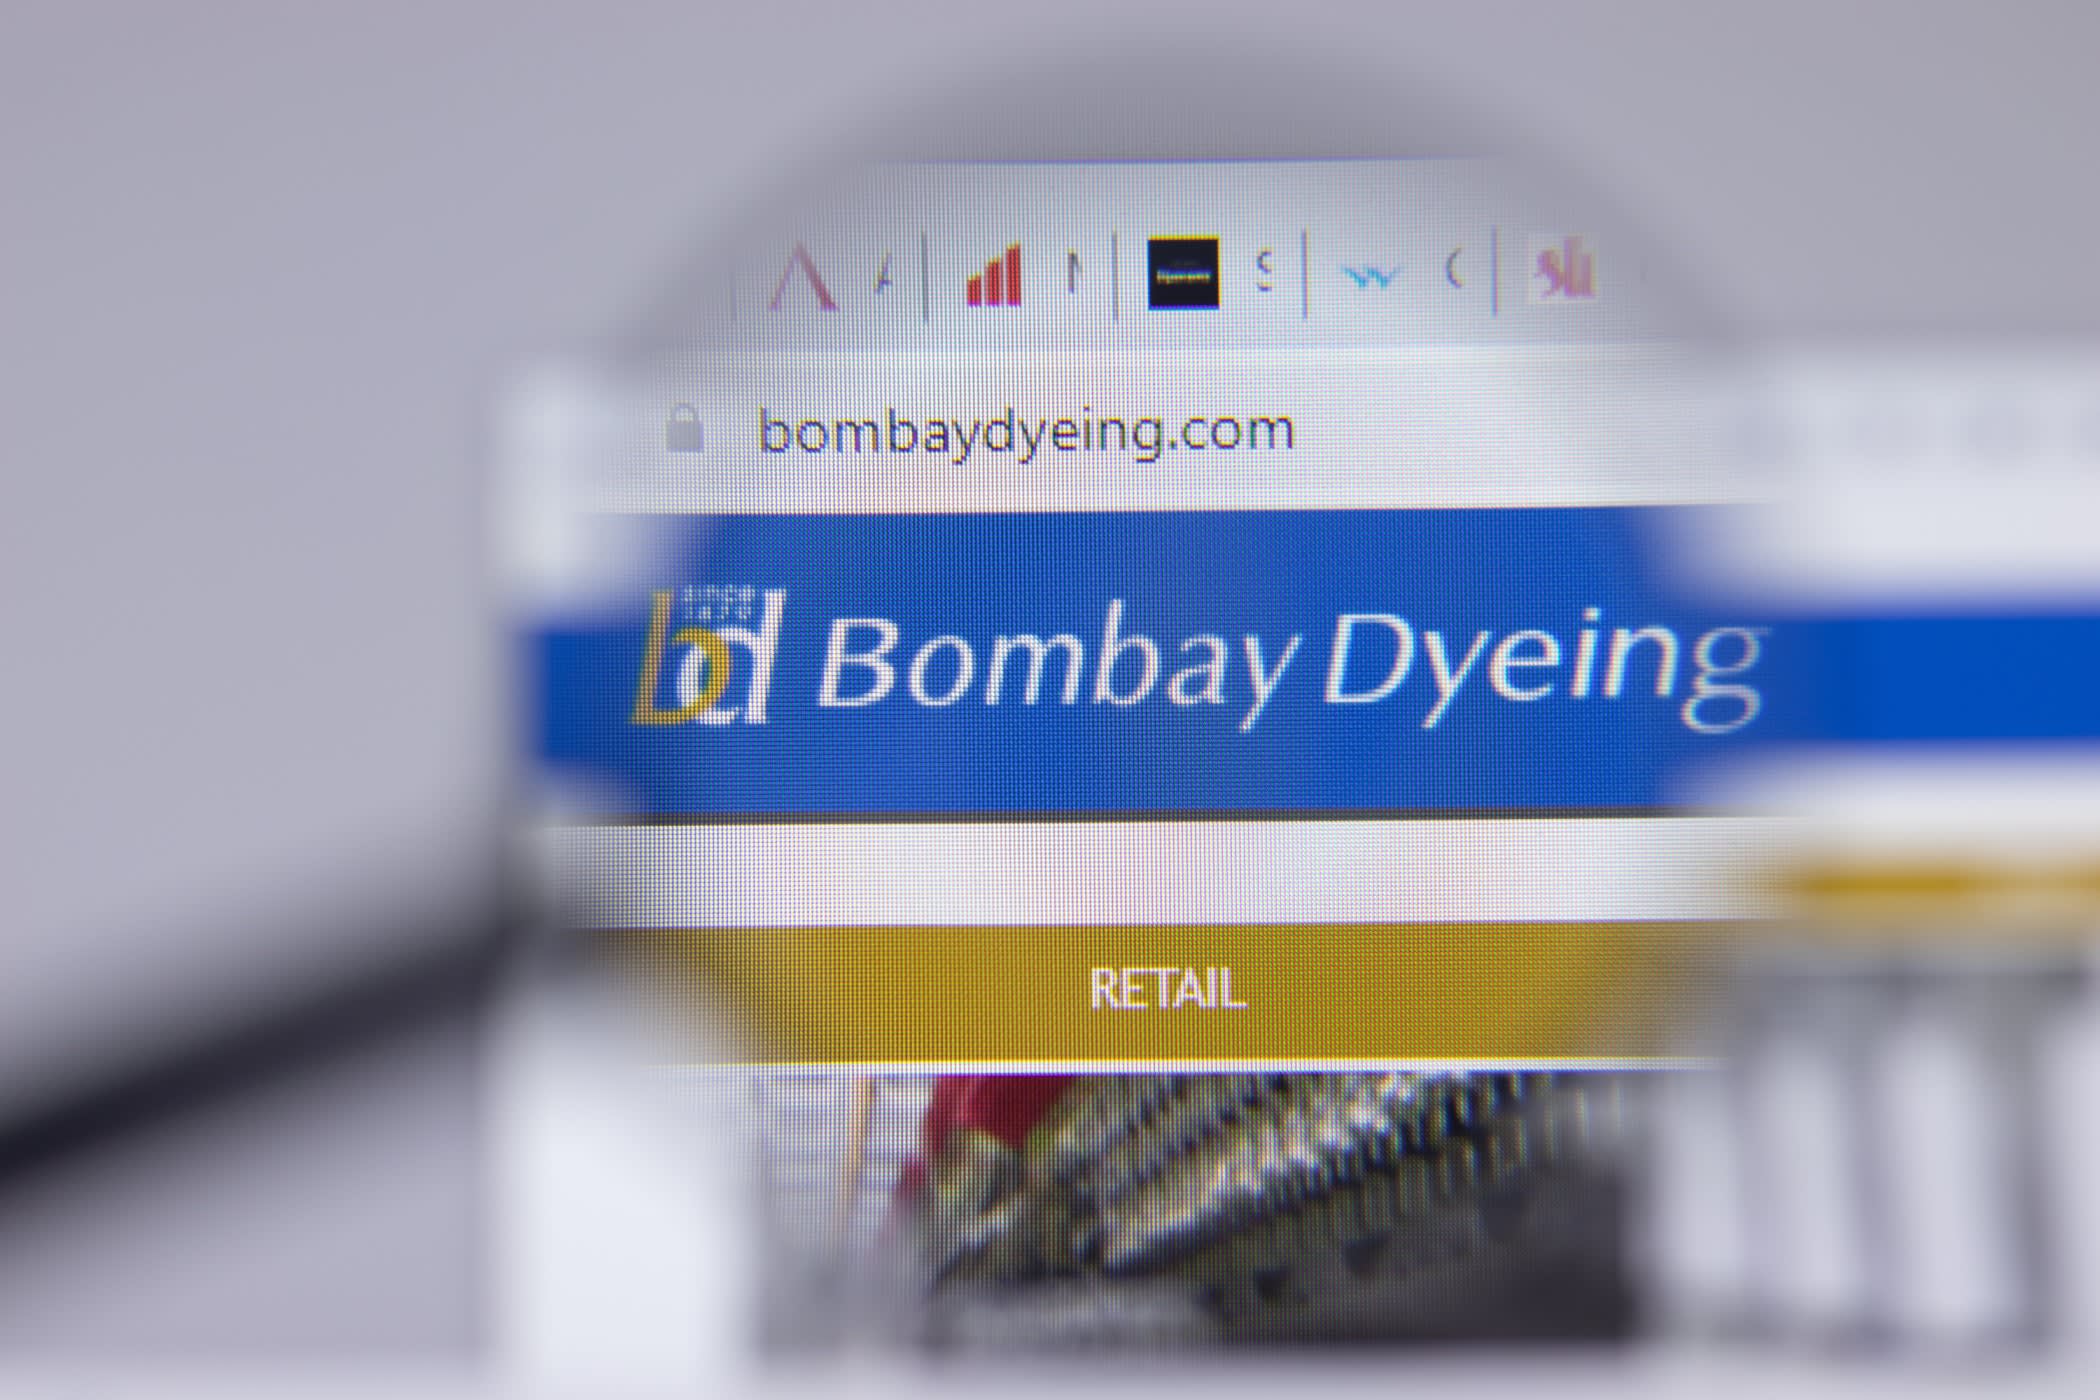 Where Can I buy Bombay Dyeing Bedsheets at Wholesale Prices?